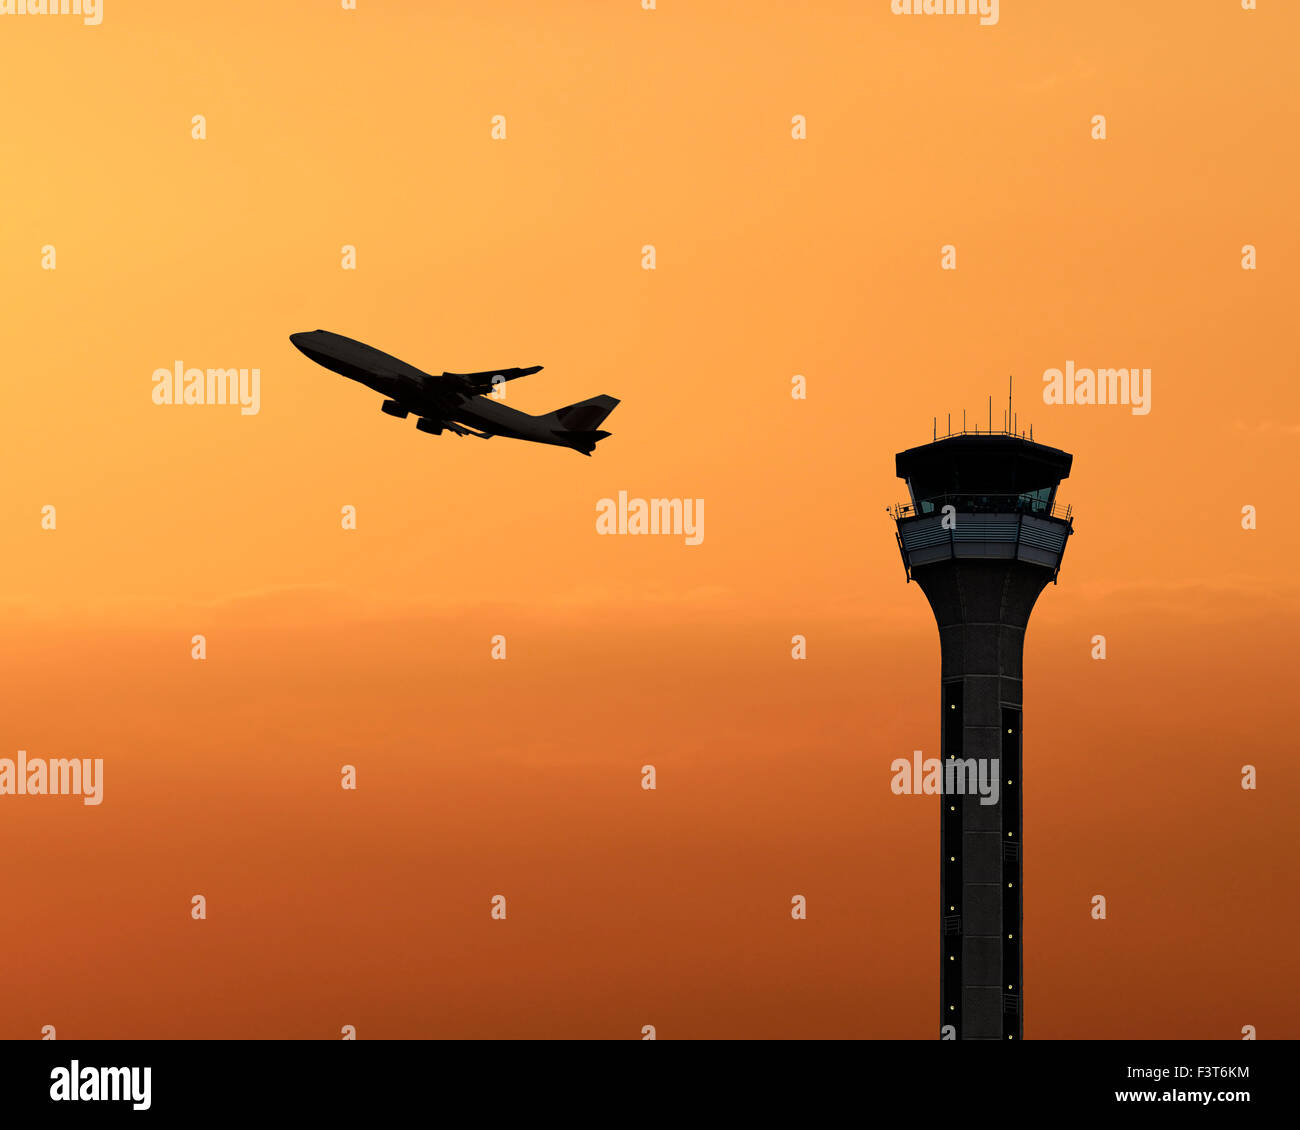 Air traffic control tower with a plane taking off at sunset. Luton Airport, UK. Stock Photo